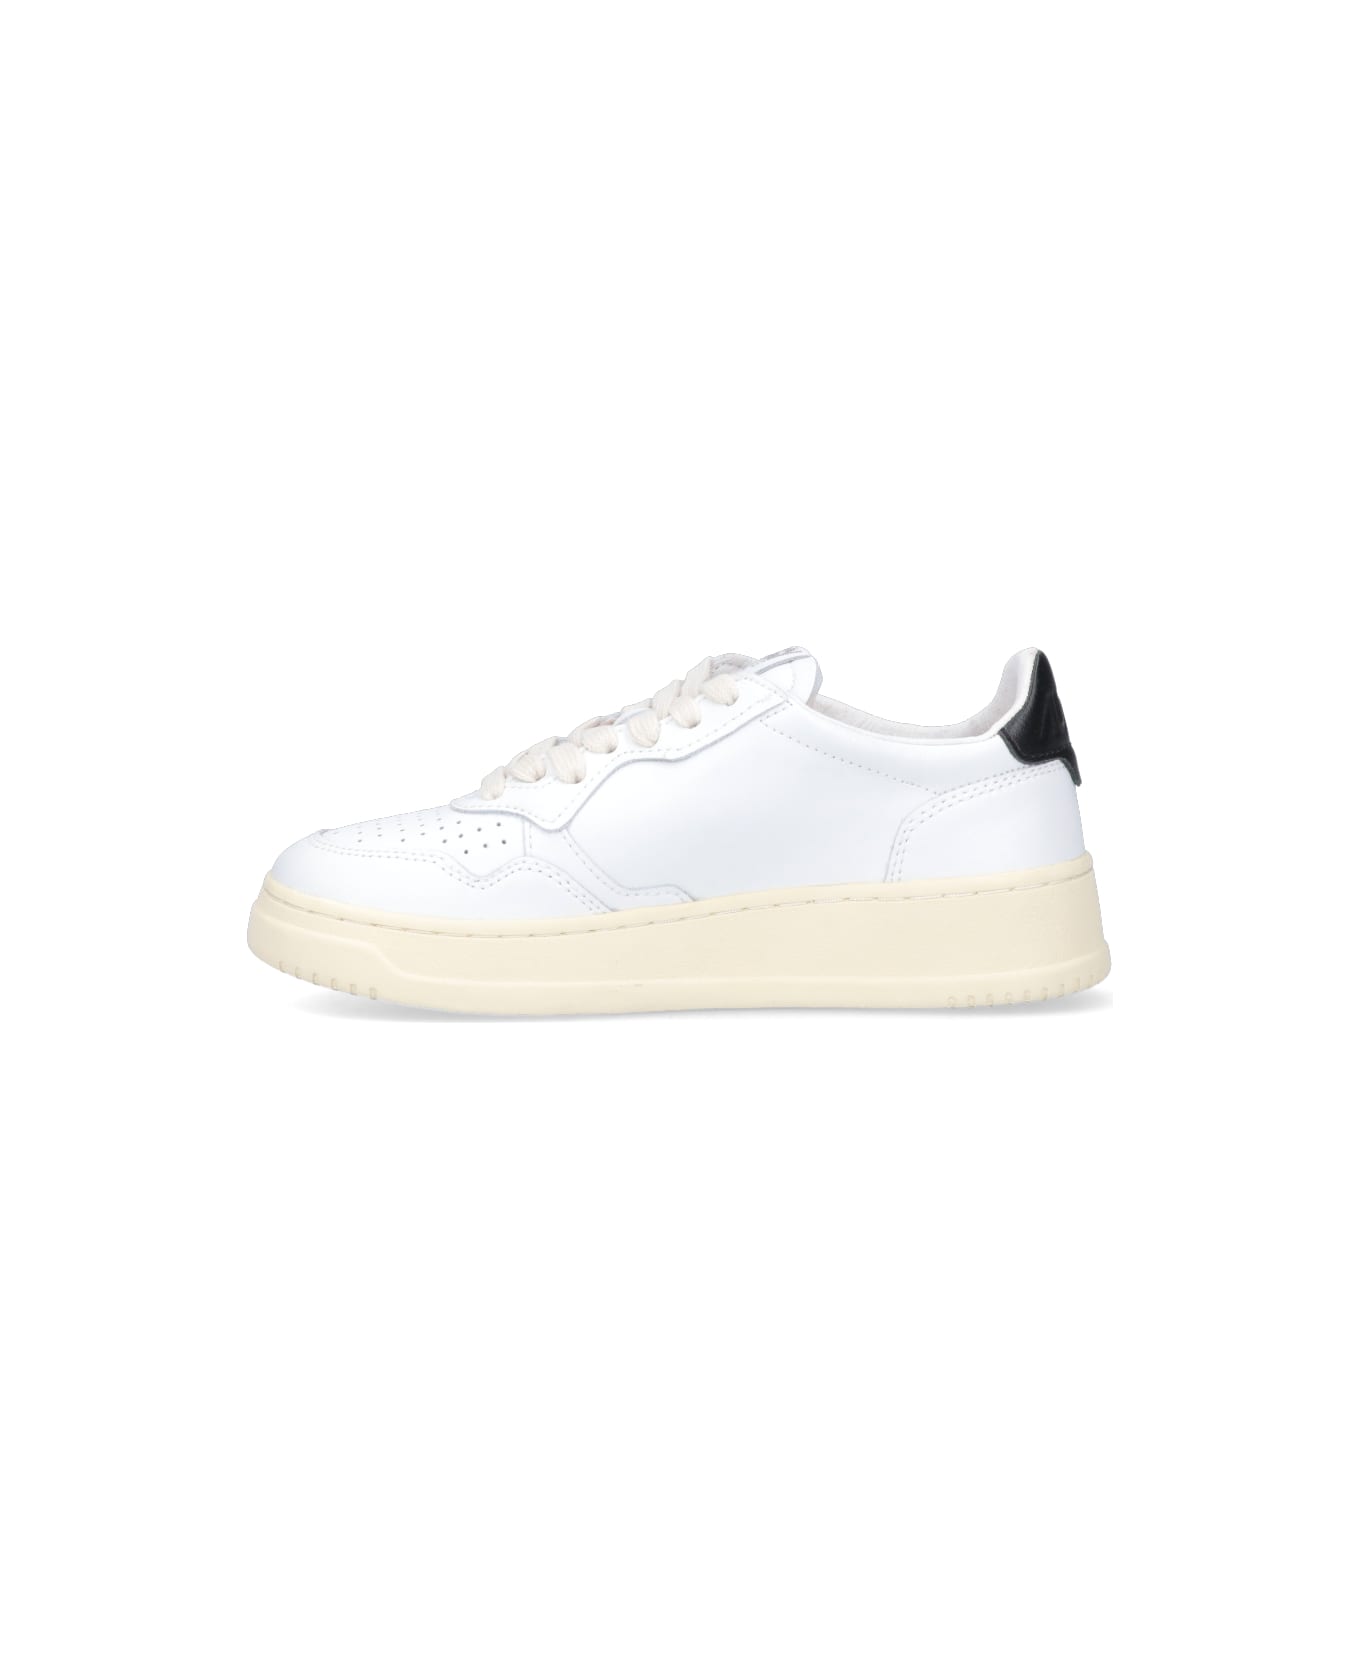 Autry Sneakers Low 'medalist' - White スニーカー